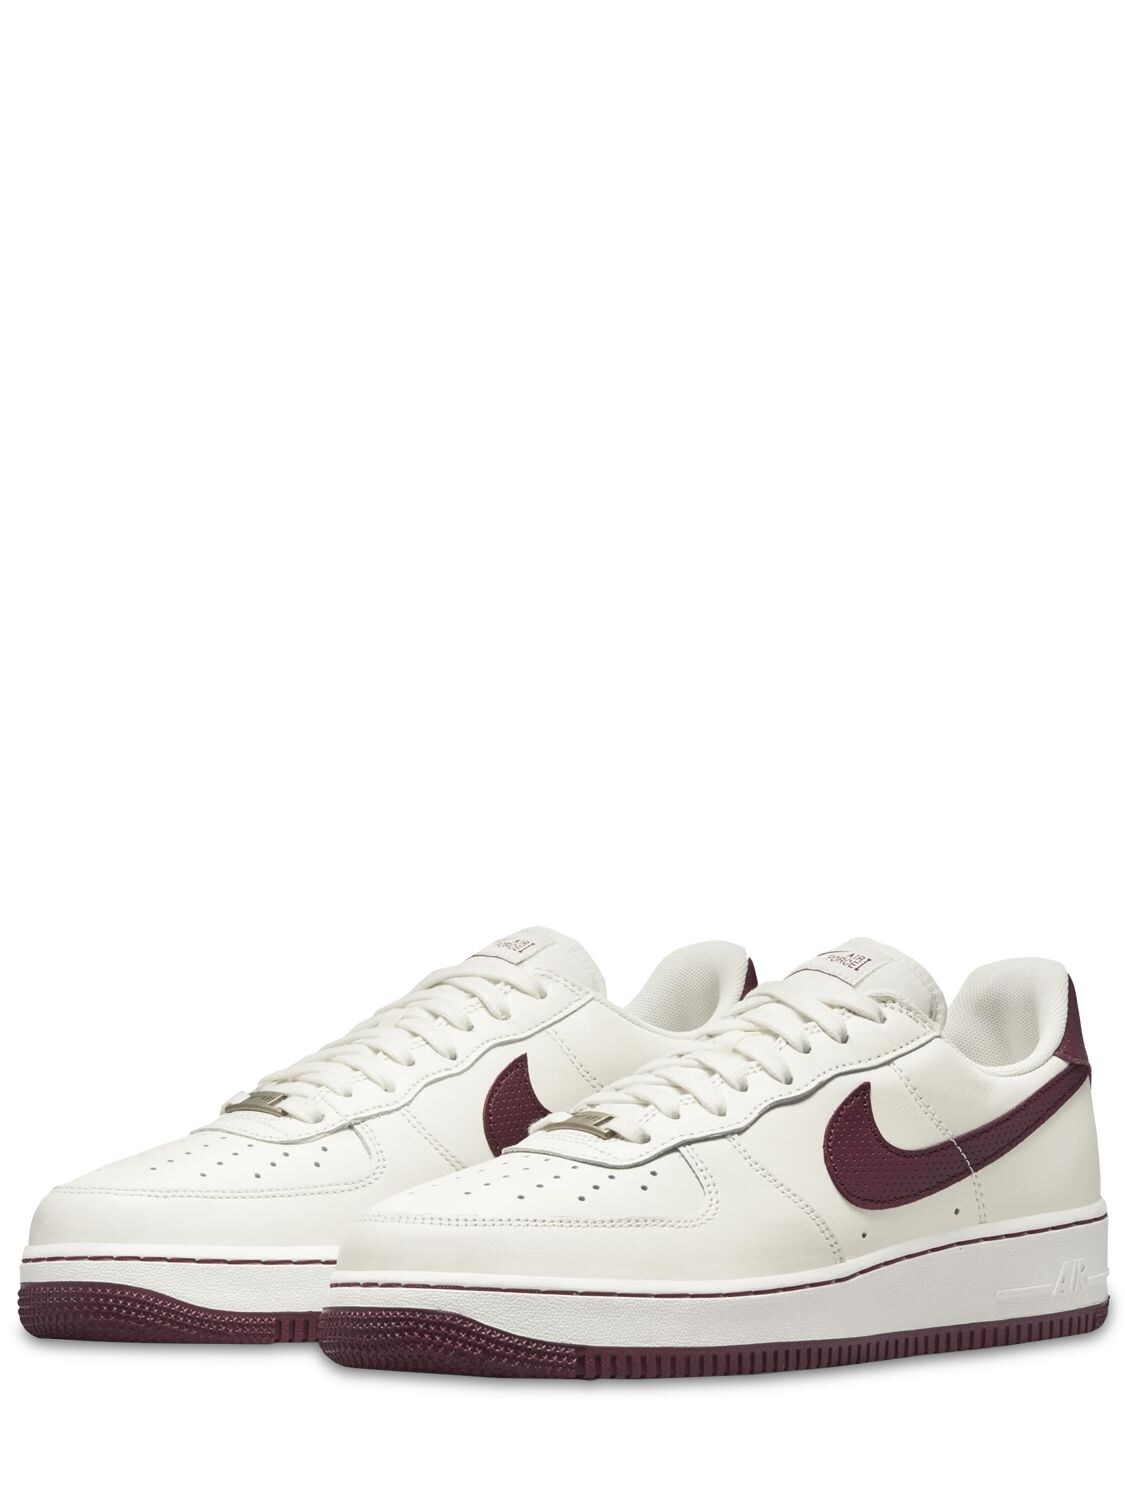 Nike Air Force 1 07 Craft Trainers Db4455-100 In Sail | ModeSens